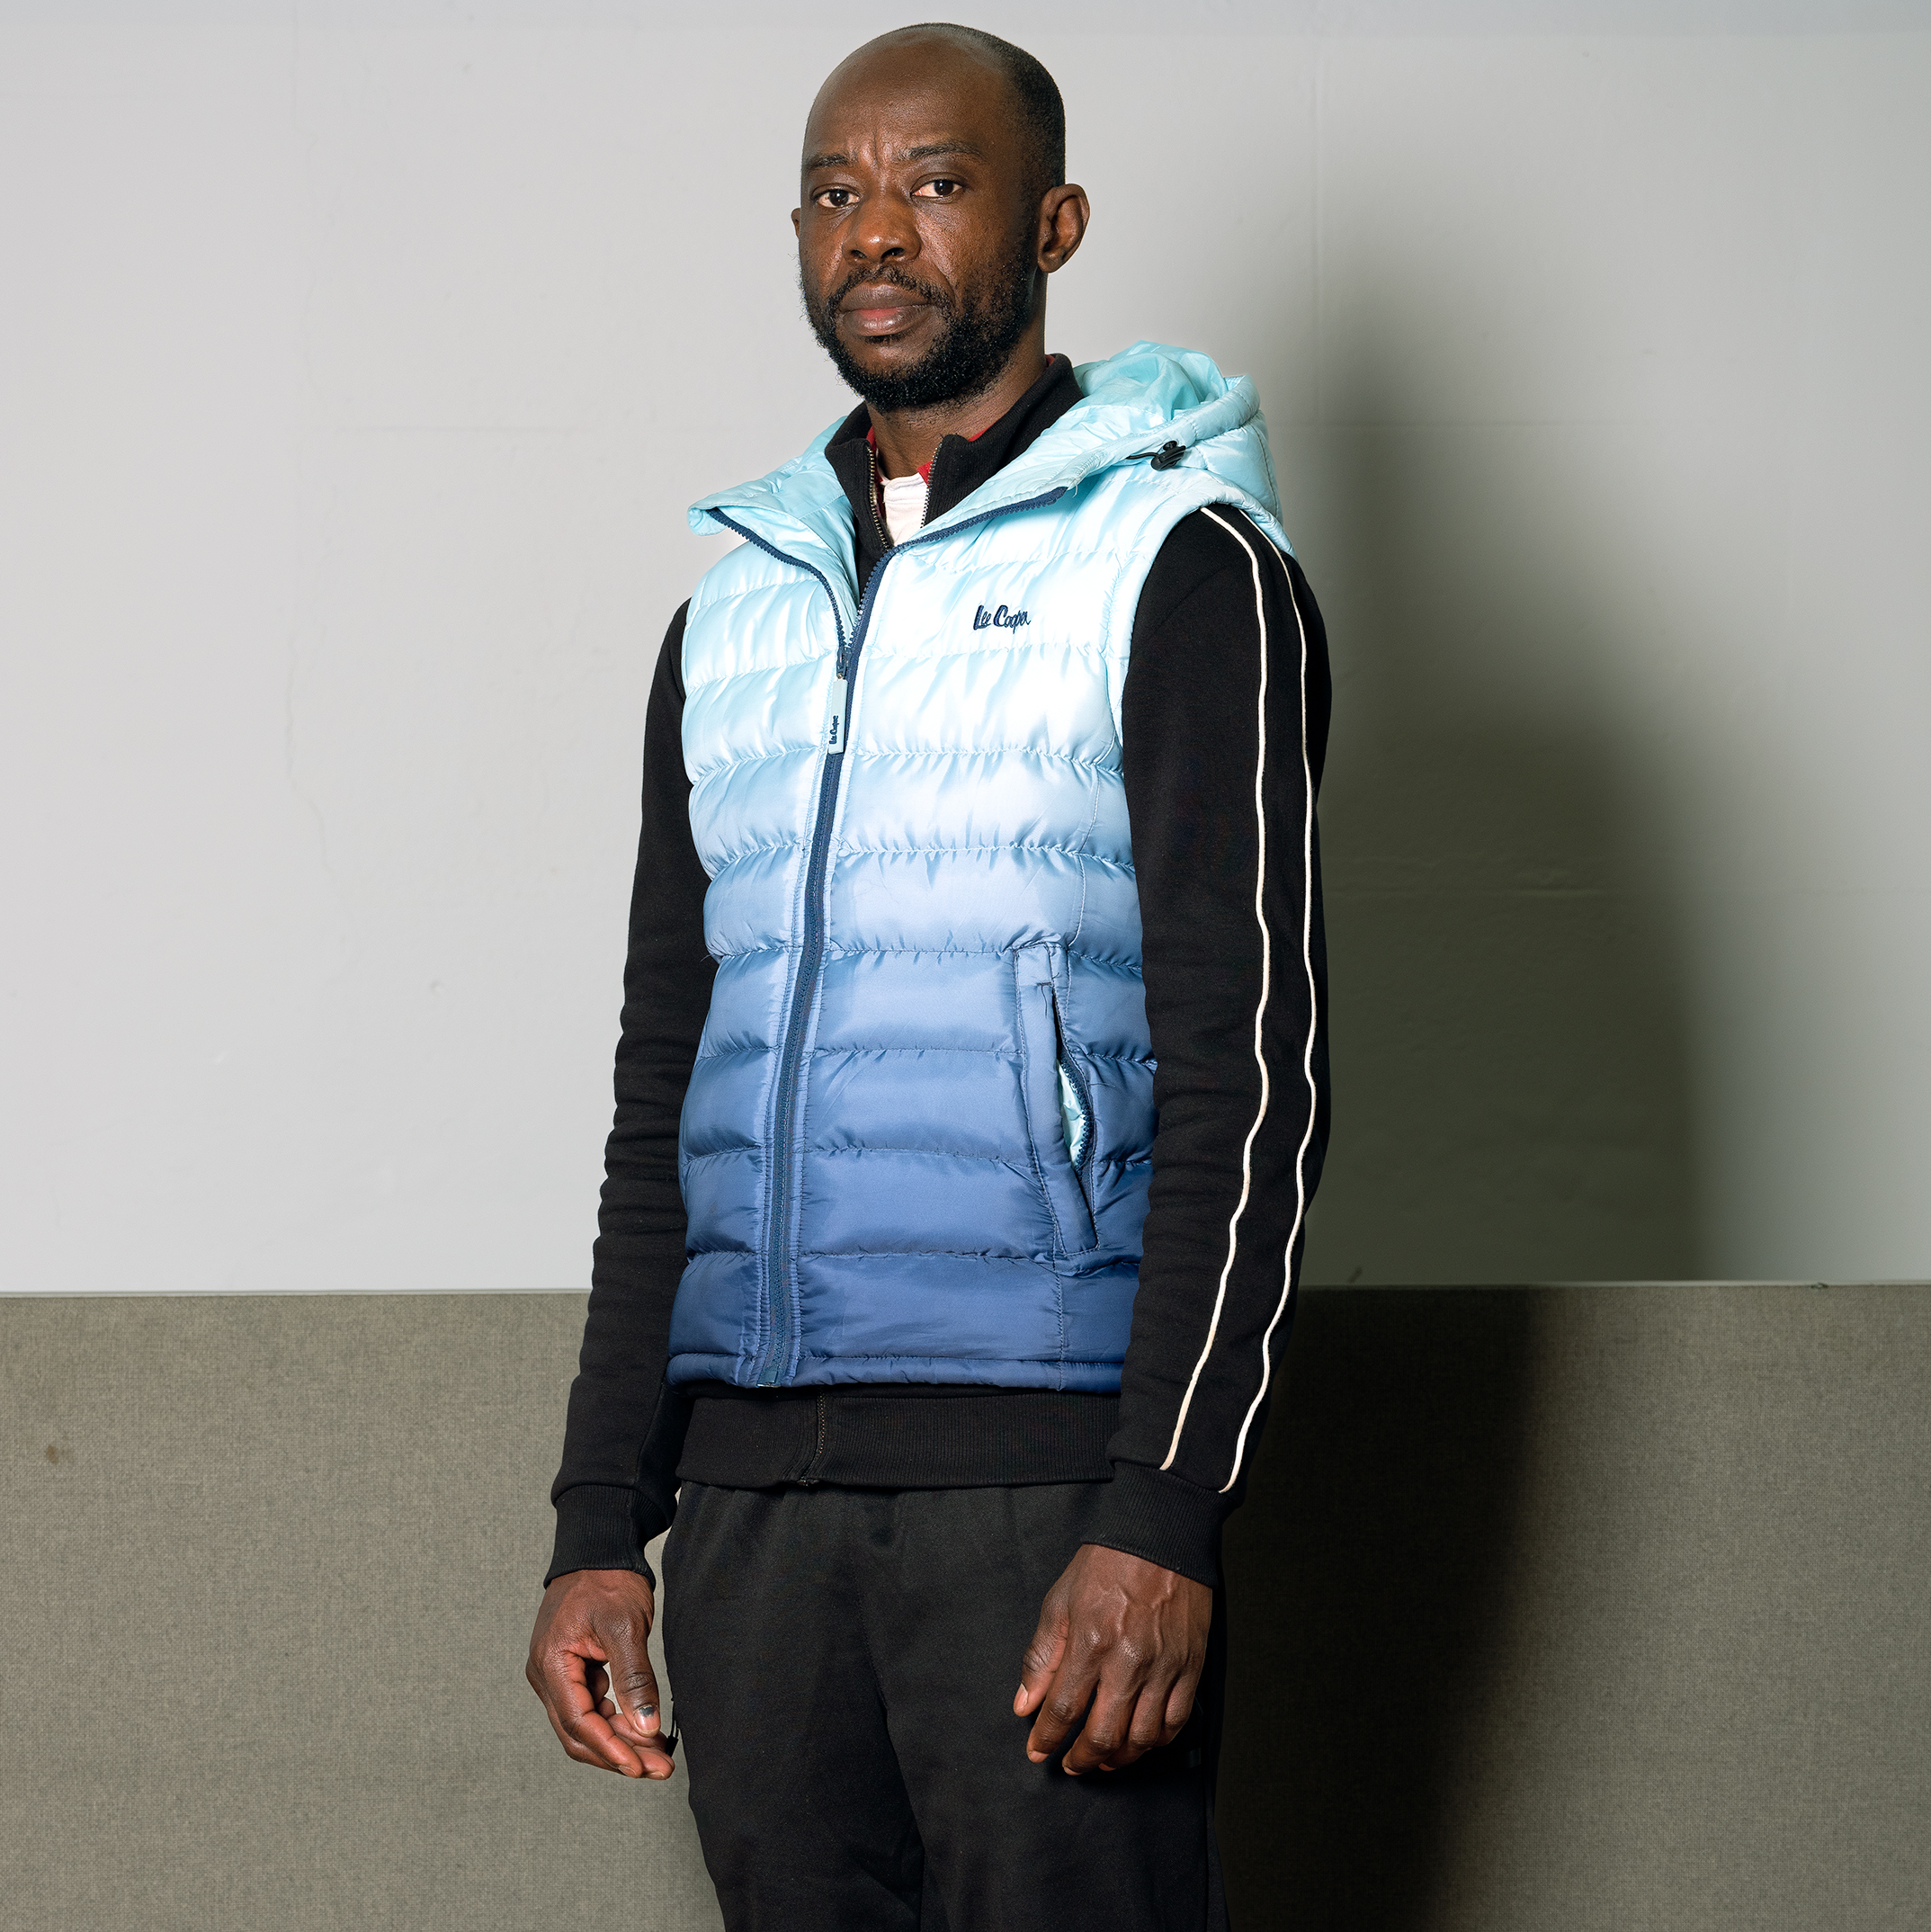 Siki wearing a blue and white gillet and looking at the camera